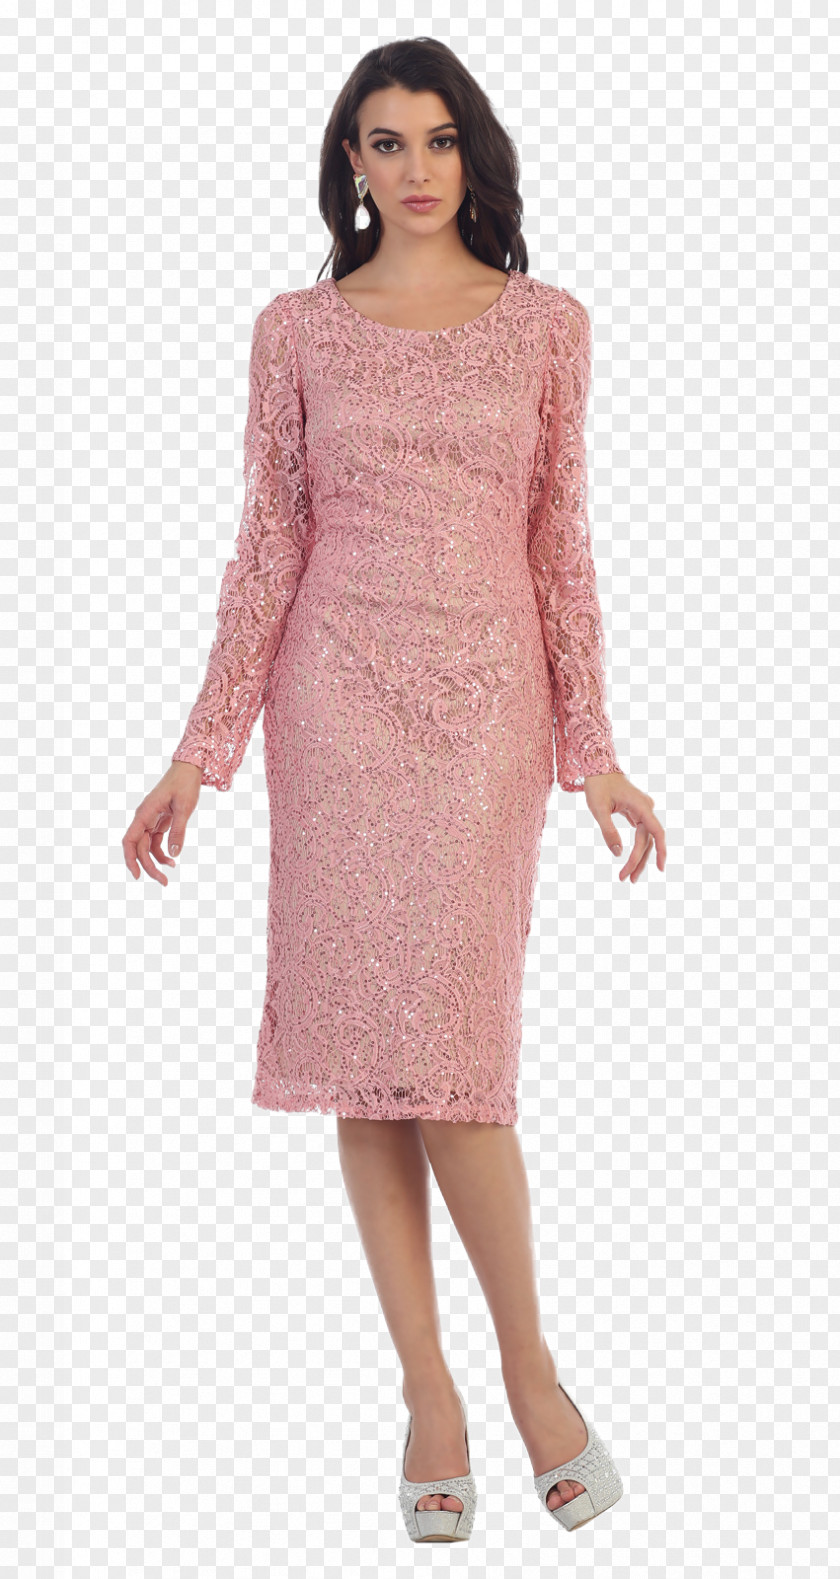 Layered Clothing Cocktail Dress Sleeve Wedding Sequin PNG